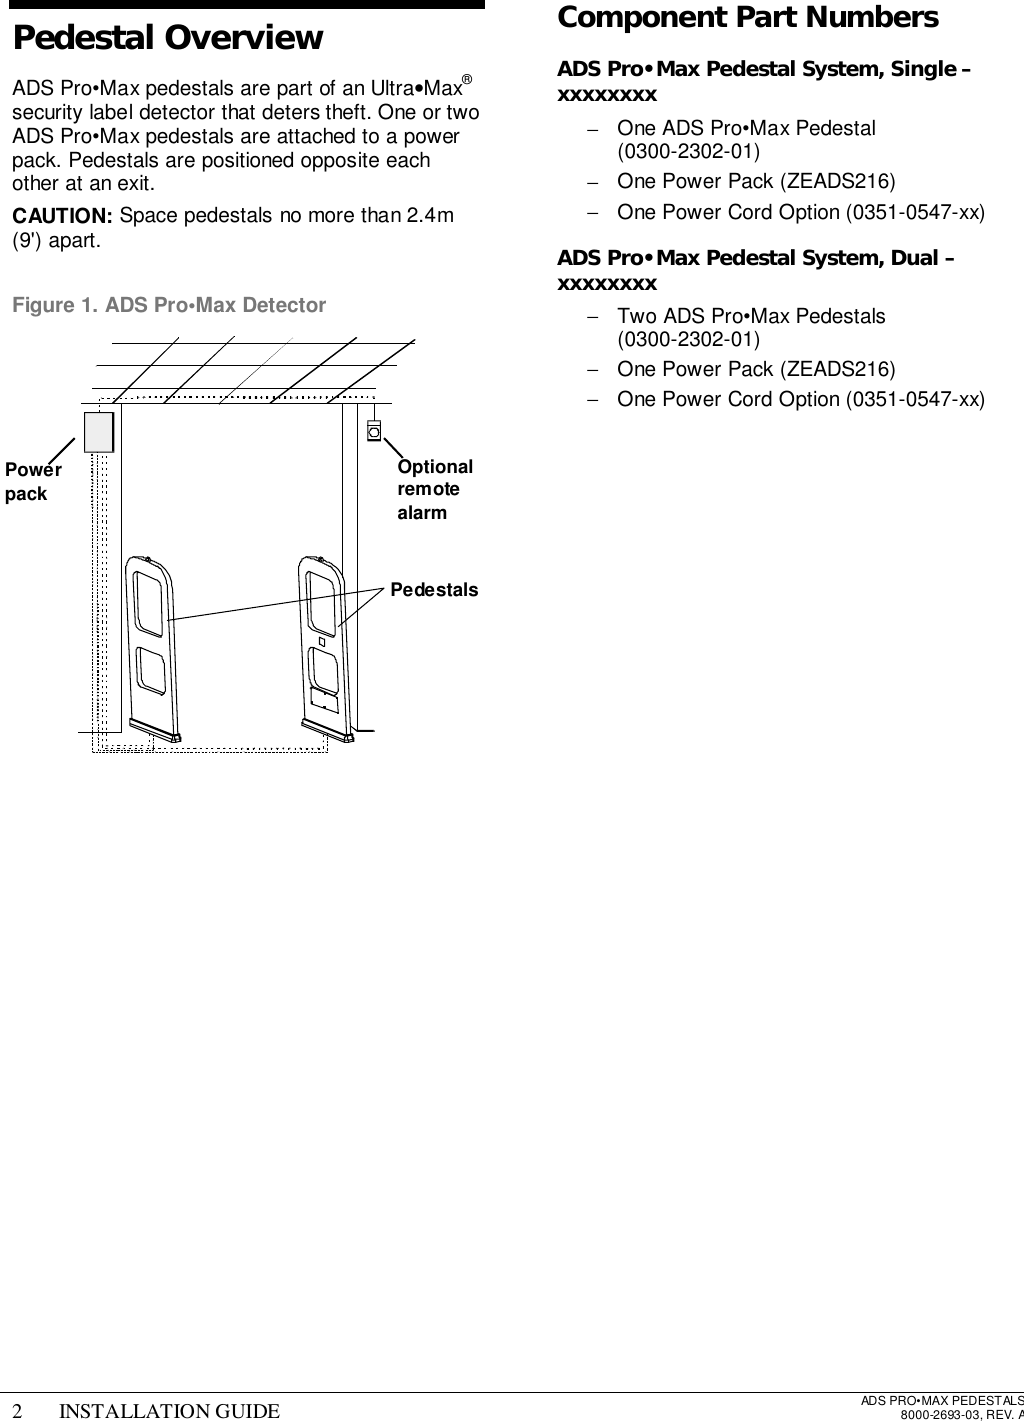 2 INSTALLATION GUIDE ADS PRO•MAX PEDESTALS8000-2693-03, REV. APedestal OverviewADS Pro•Max pedestals are part of an Ultra•Max®security label detector that deters theft. One or twoADS Pro•Max pedestals are attached to a powerpack. Pedestals are positioned opposite eachother at an exit.CAUTION: Space pedestals no more than 2.4m(9&apos;) apart.Figure 1. ADS Pro•Max DetectorComponent Part NumbersADS Pro•Max Pedestal System, Single –xxxxxxxx−  One ADS Pro•Max Pedestal (0300-2302-01)−  One Power Pack (ZEADS216)−  One Power Cord Option (0351-0547-xx)ADS Pro•Max Pedestal System, Dual –xxxxxxxx−  Two ADS Pro•Max Pedestals (0300-2302-01)−  One Power Pack (ZEADS216)−  One Power Cord Option (0351-0547-xx)PowerpackOptionalremotealarmPedestals